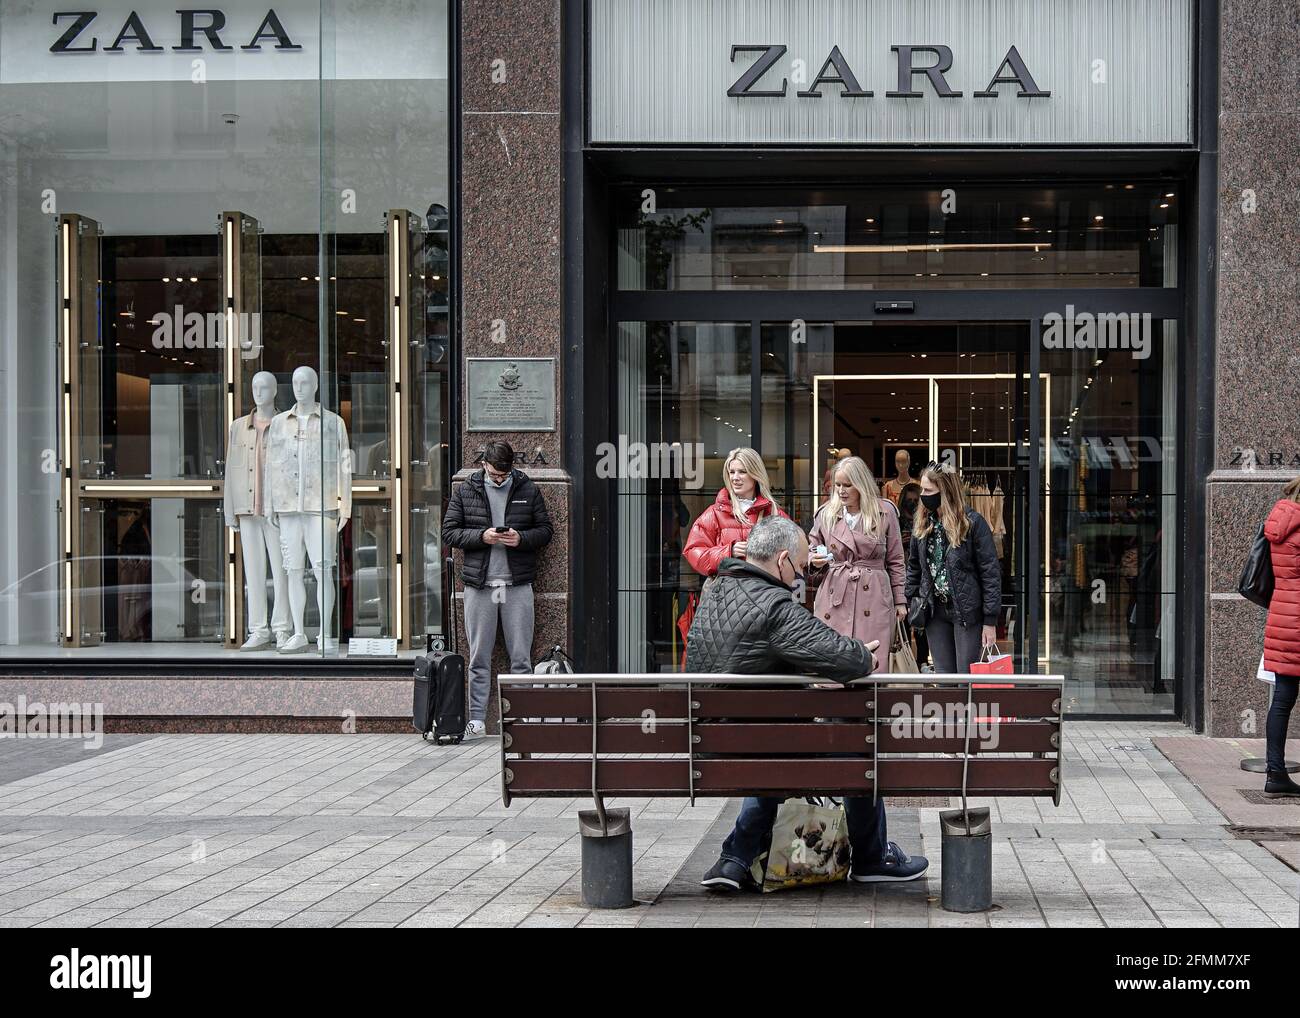 Belfast, Antrim, UK. 9th May, 2021. Shoppers seen leaving the Zara Clothes  Store. Credit: Michael Mcnerney/SOPA Images/ZUMA Wire/Alamy Live News Stock  Photo - Alamy